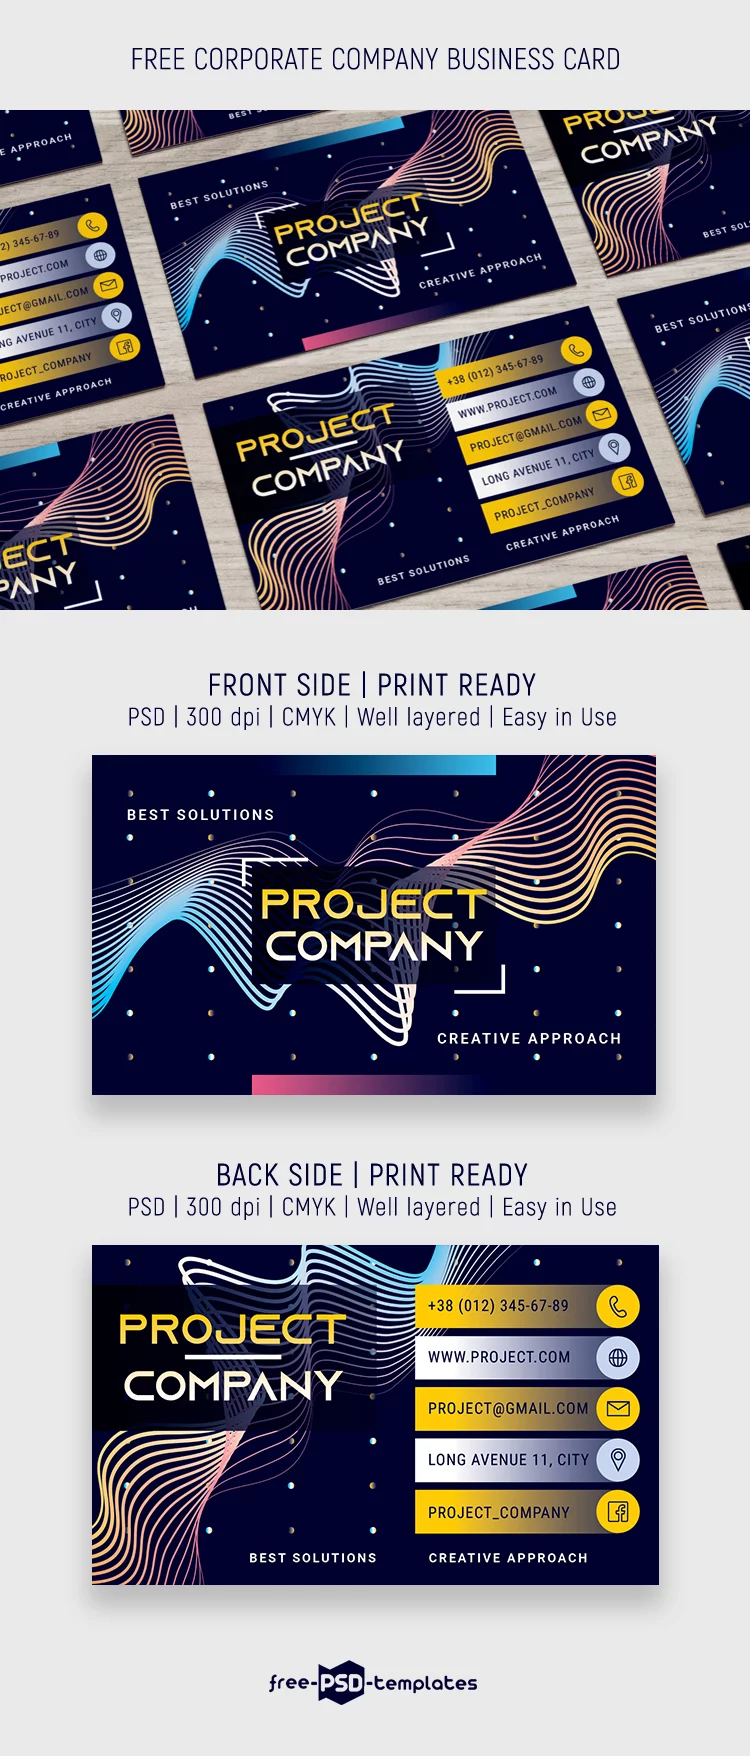 Free Corporate Company Business Card